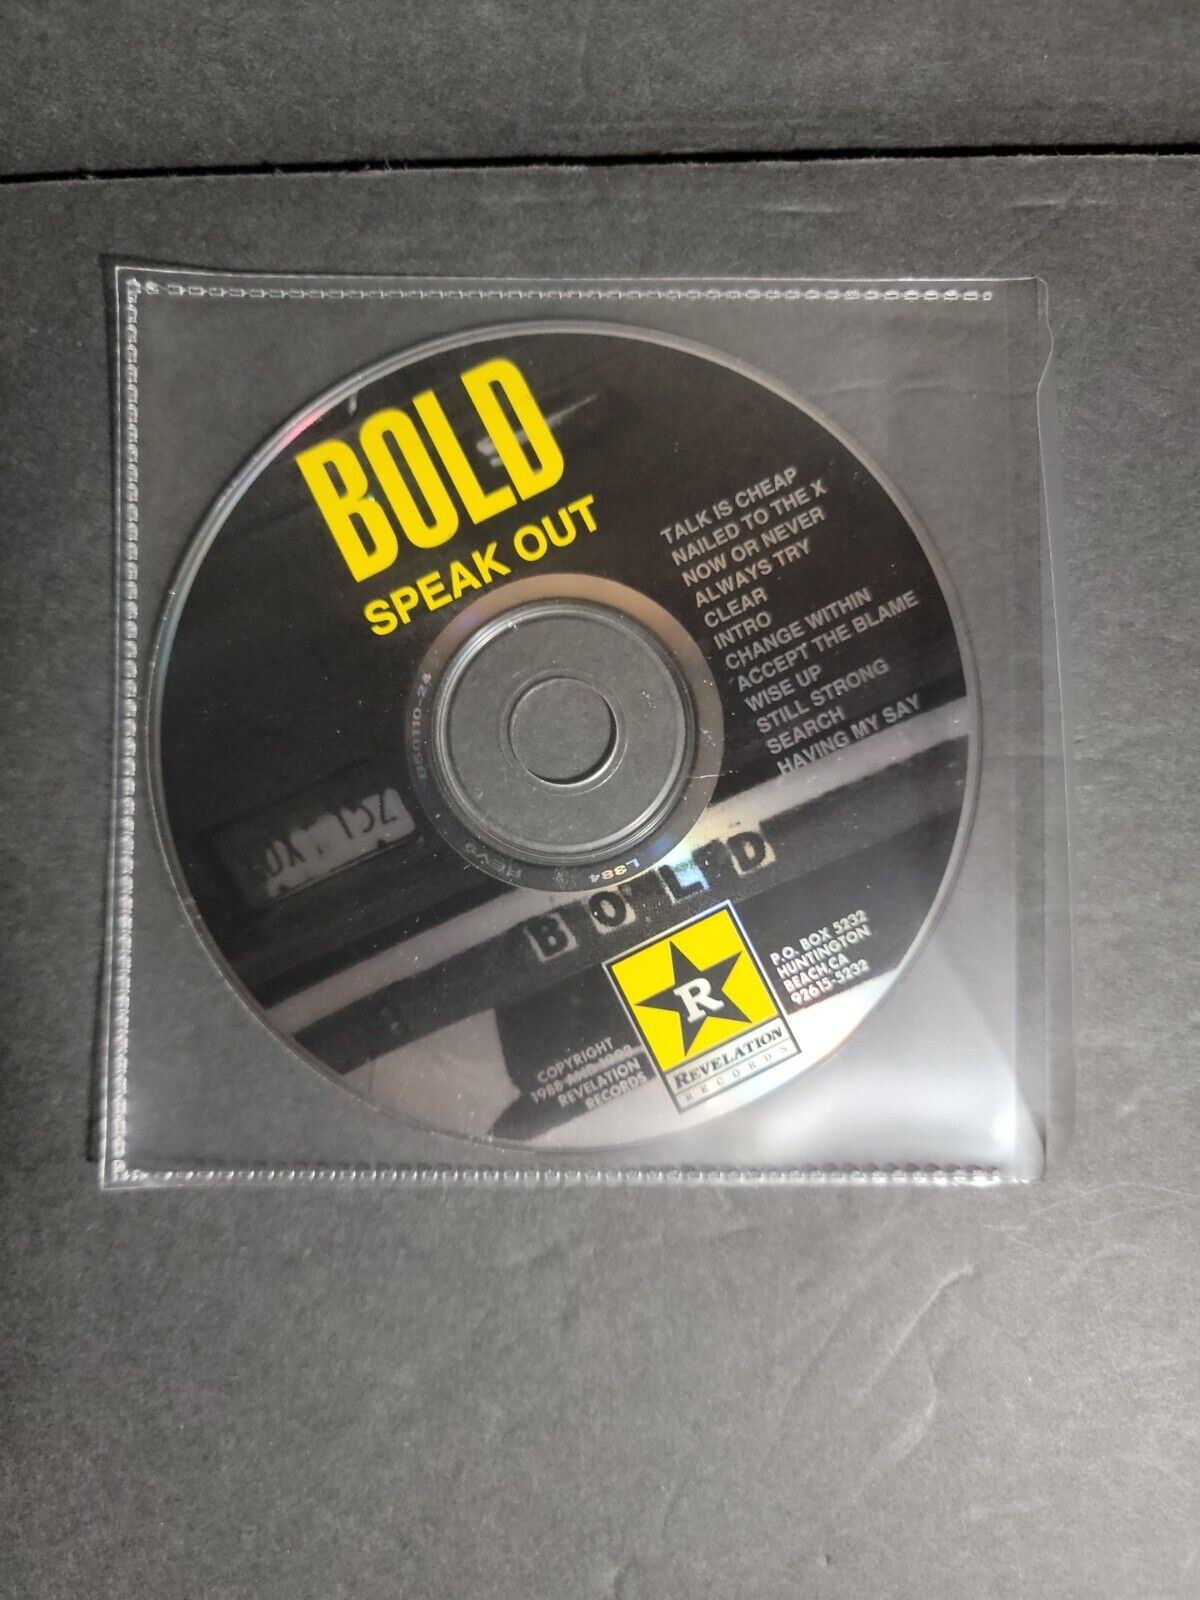 Vintage Speak Out By Bold 1988 Recording No Case